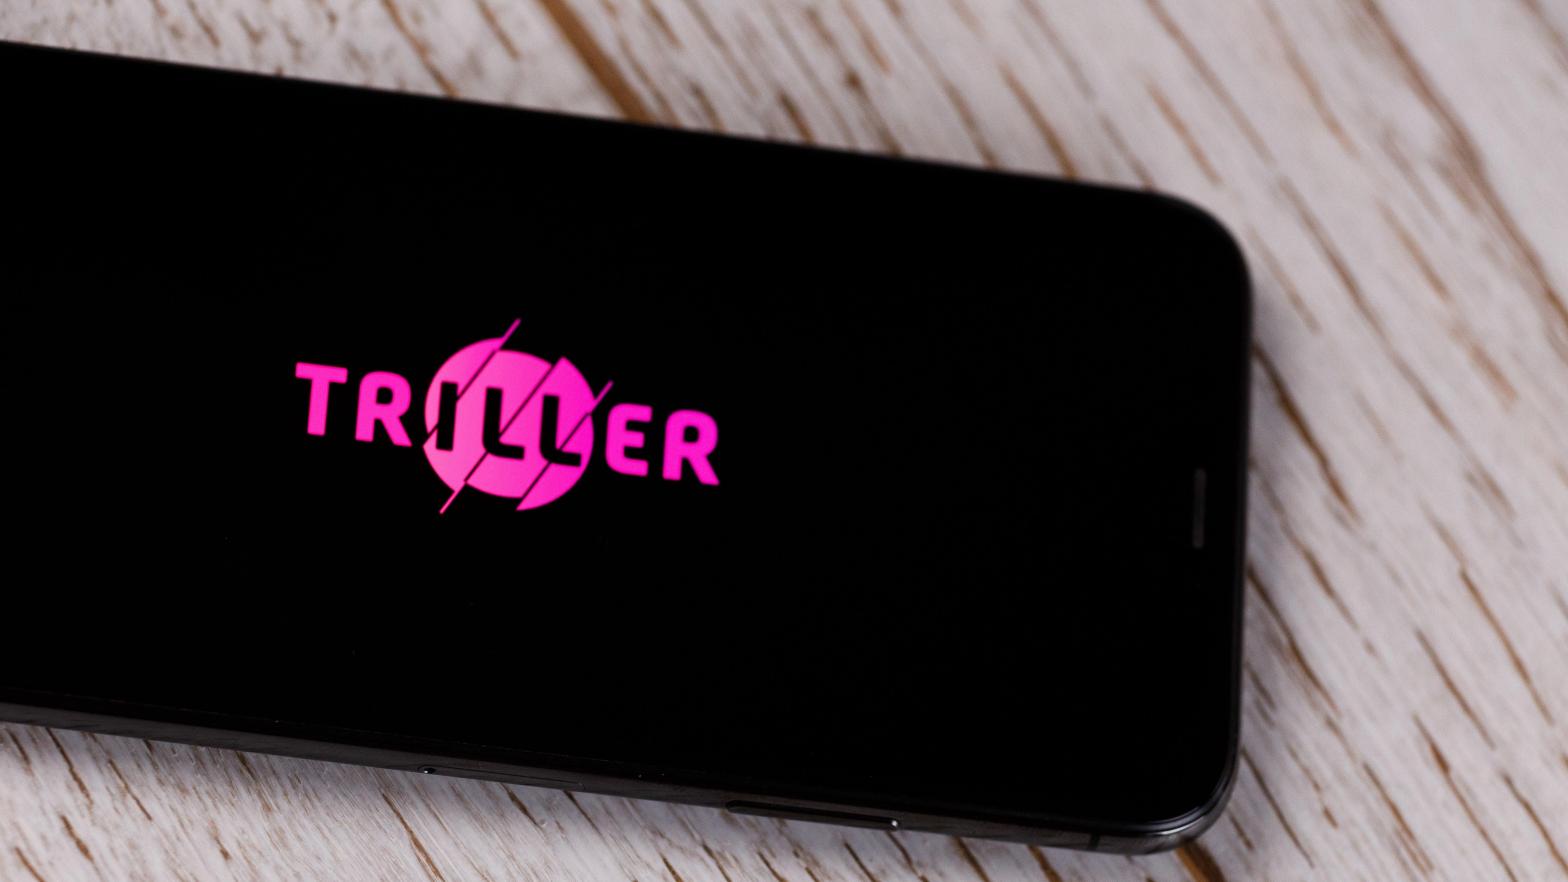 Triller's music-based video sharing business model has been seen used, arguably more successfully, by rival TikTok. (Image: XanderSt, Shutterstock)